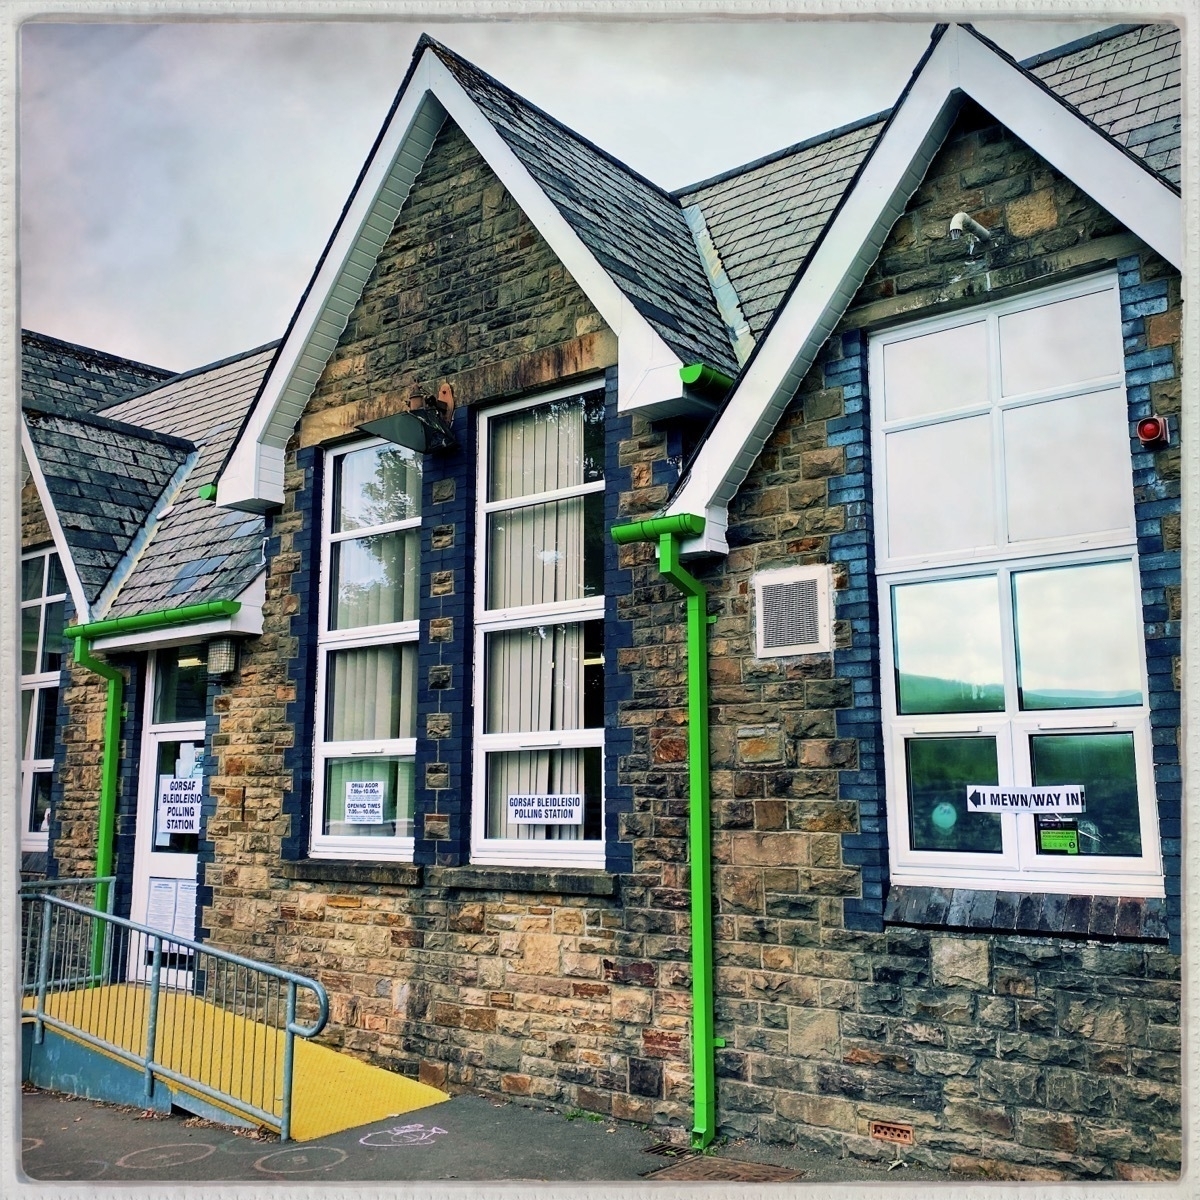 A stone building with large windows and green gutters appears to be an entrance to a school, as indicated by the signs on the doors and windows.